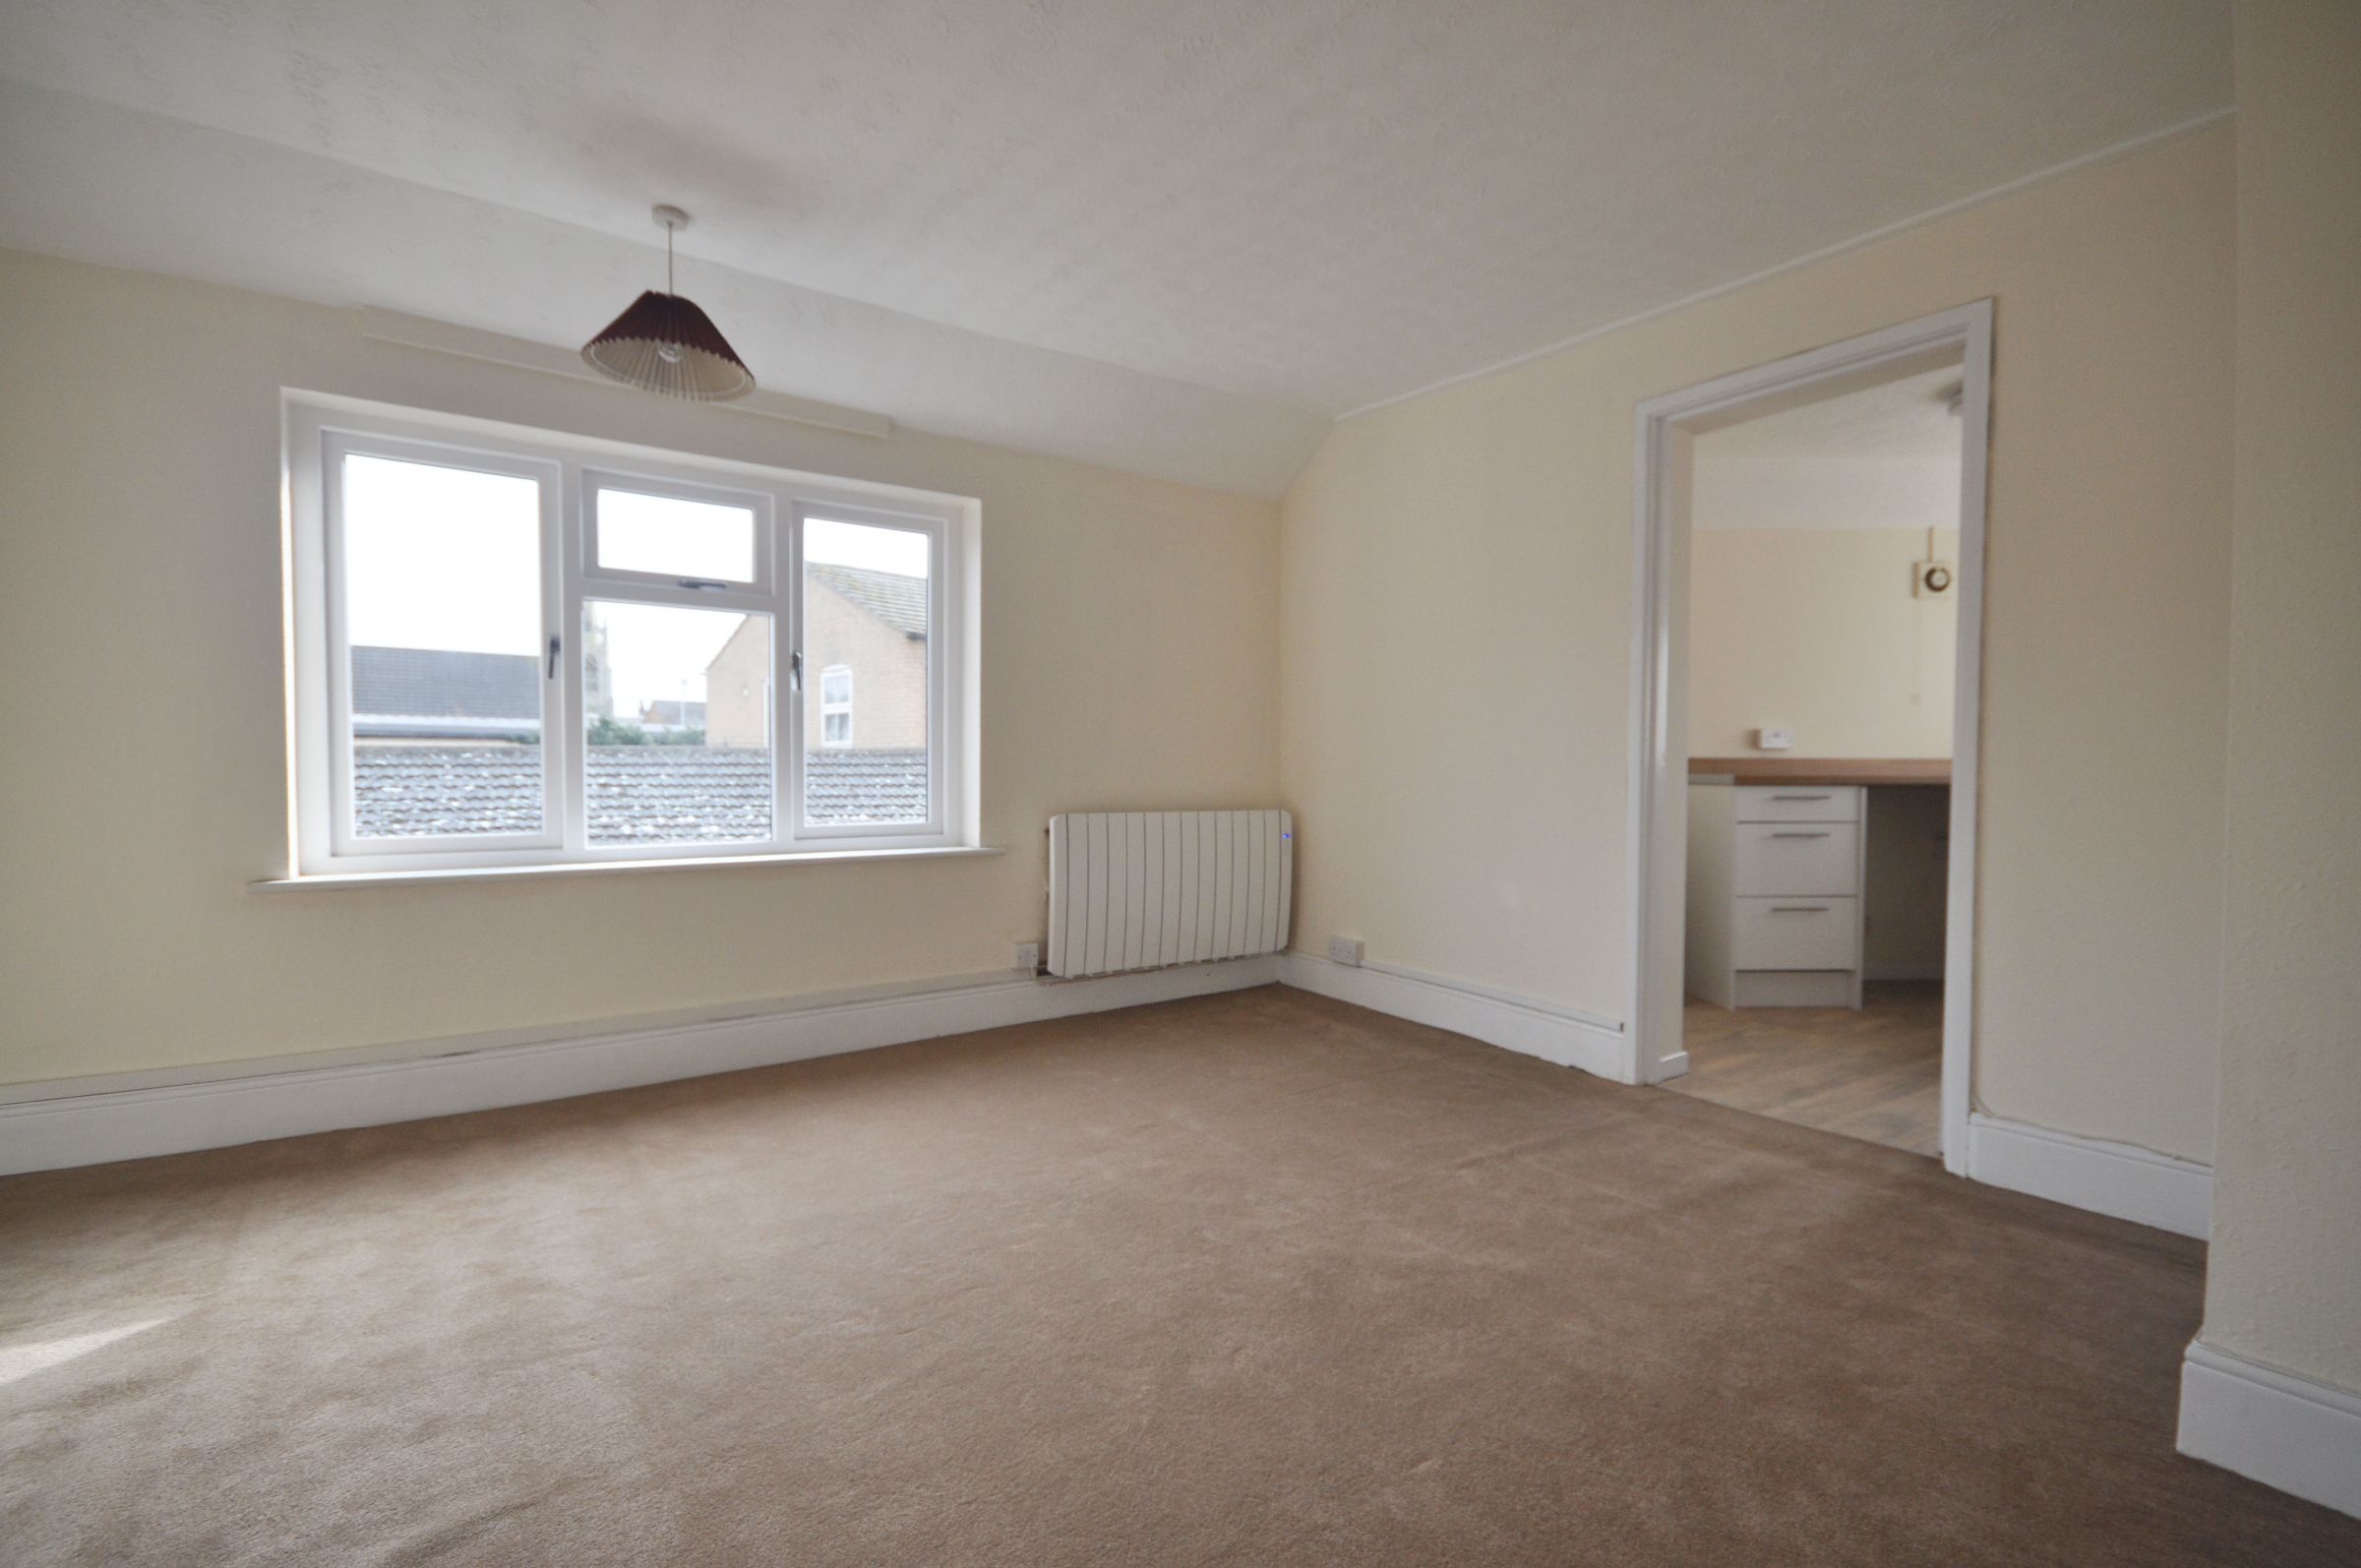 1 bed flat for sale in Whittlesey, Peterborough  - Property Image 4